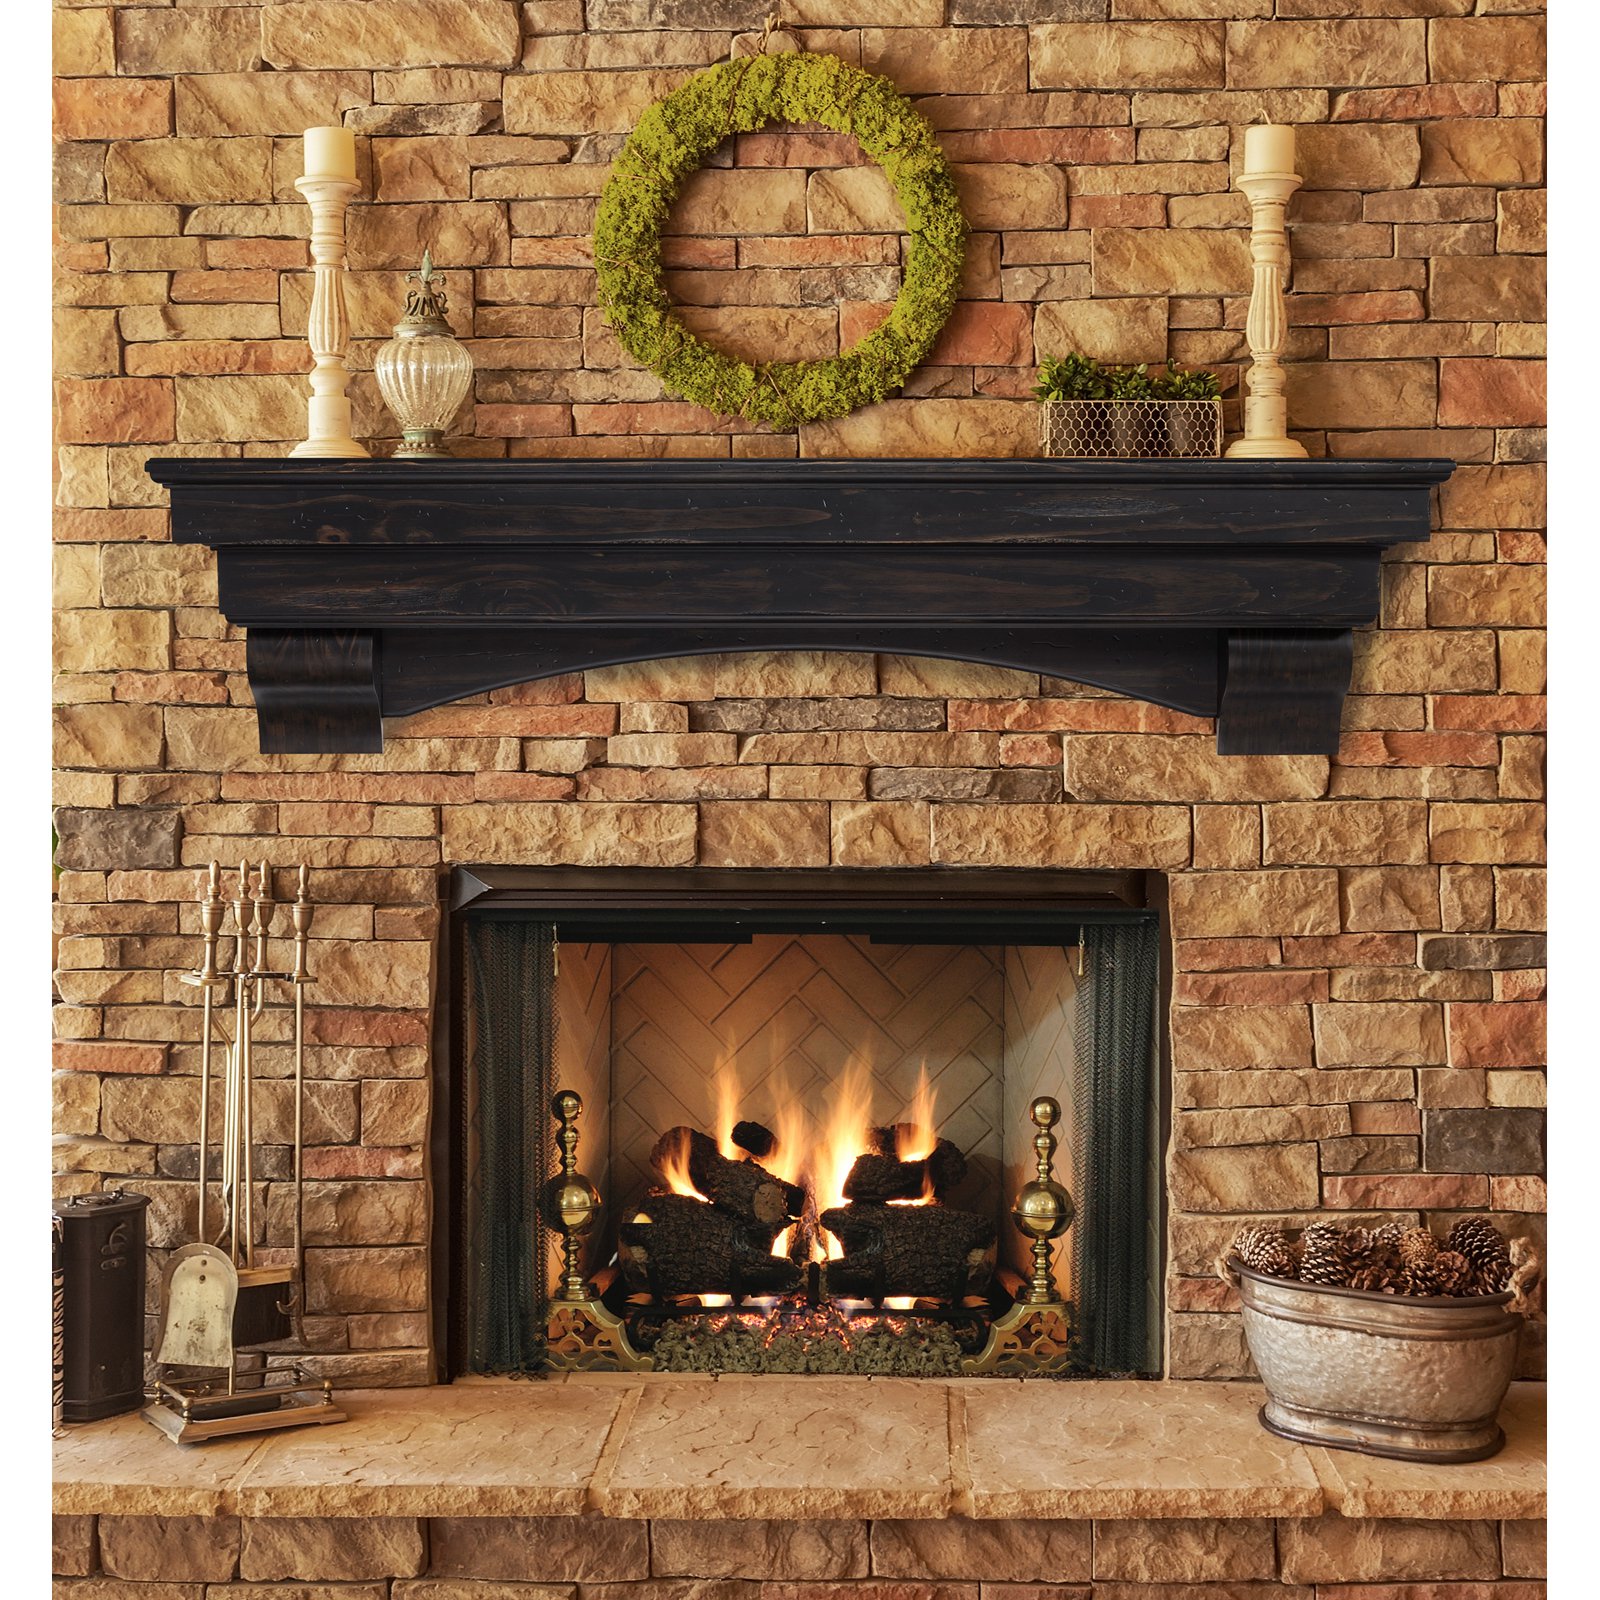 Stone Fireplace with Wood Mantel Lovely Fireplace Contemporary Fireplace Mantels with Rock Wall